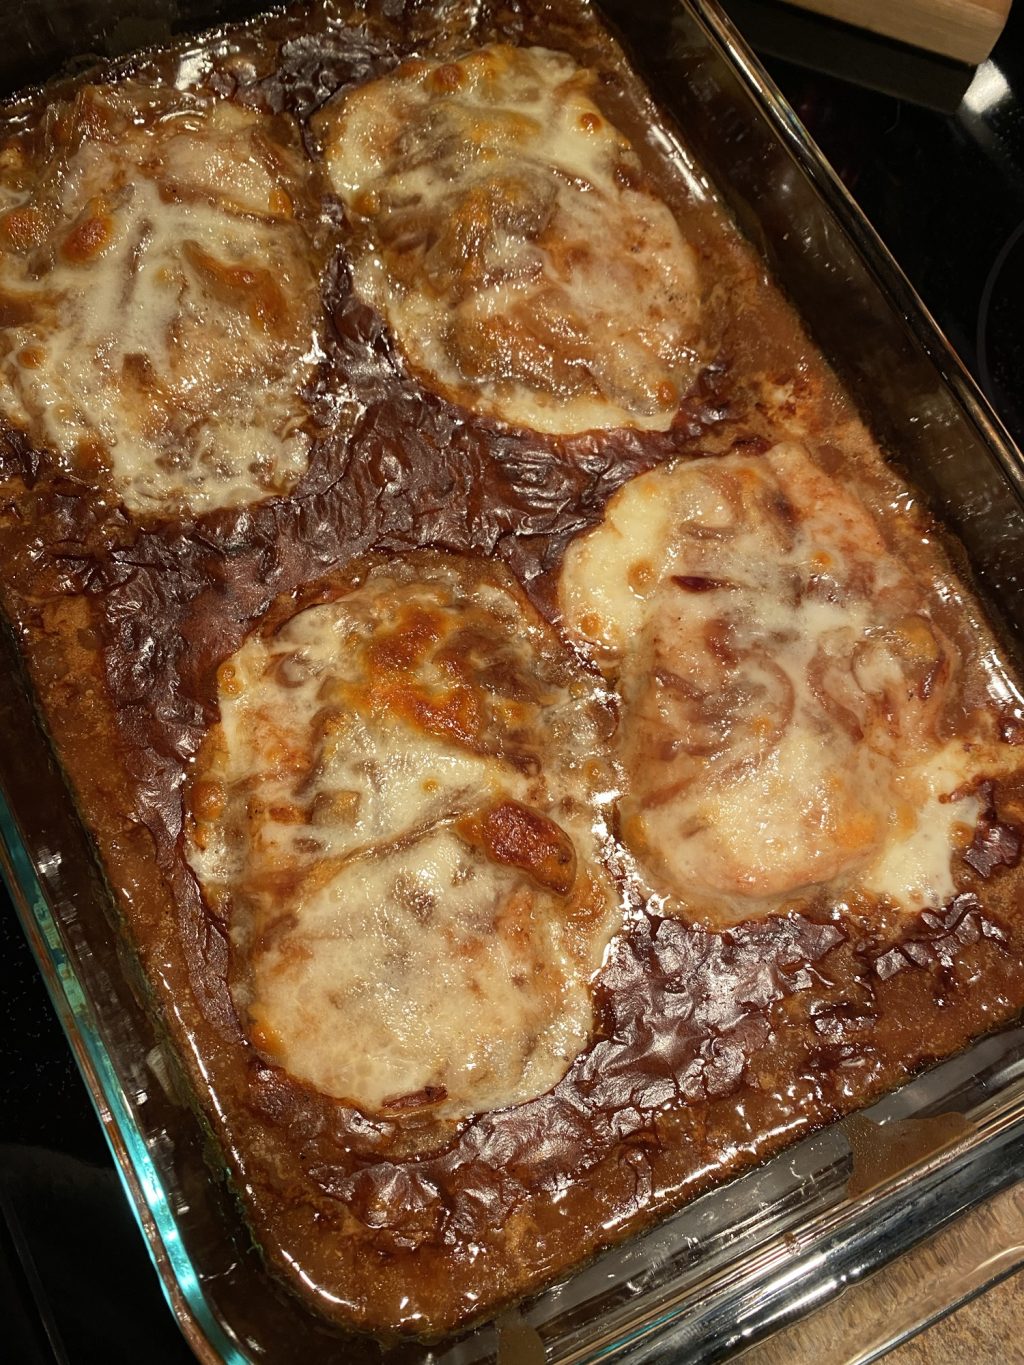 Baking dish with a brown onion gravy with boneless thick cut pork chops smothered in a white provolone cheese.